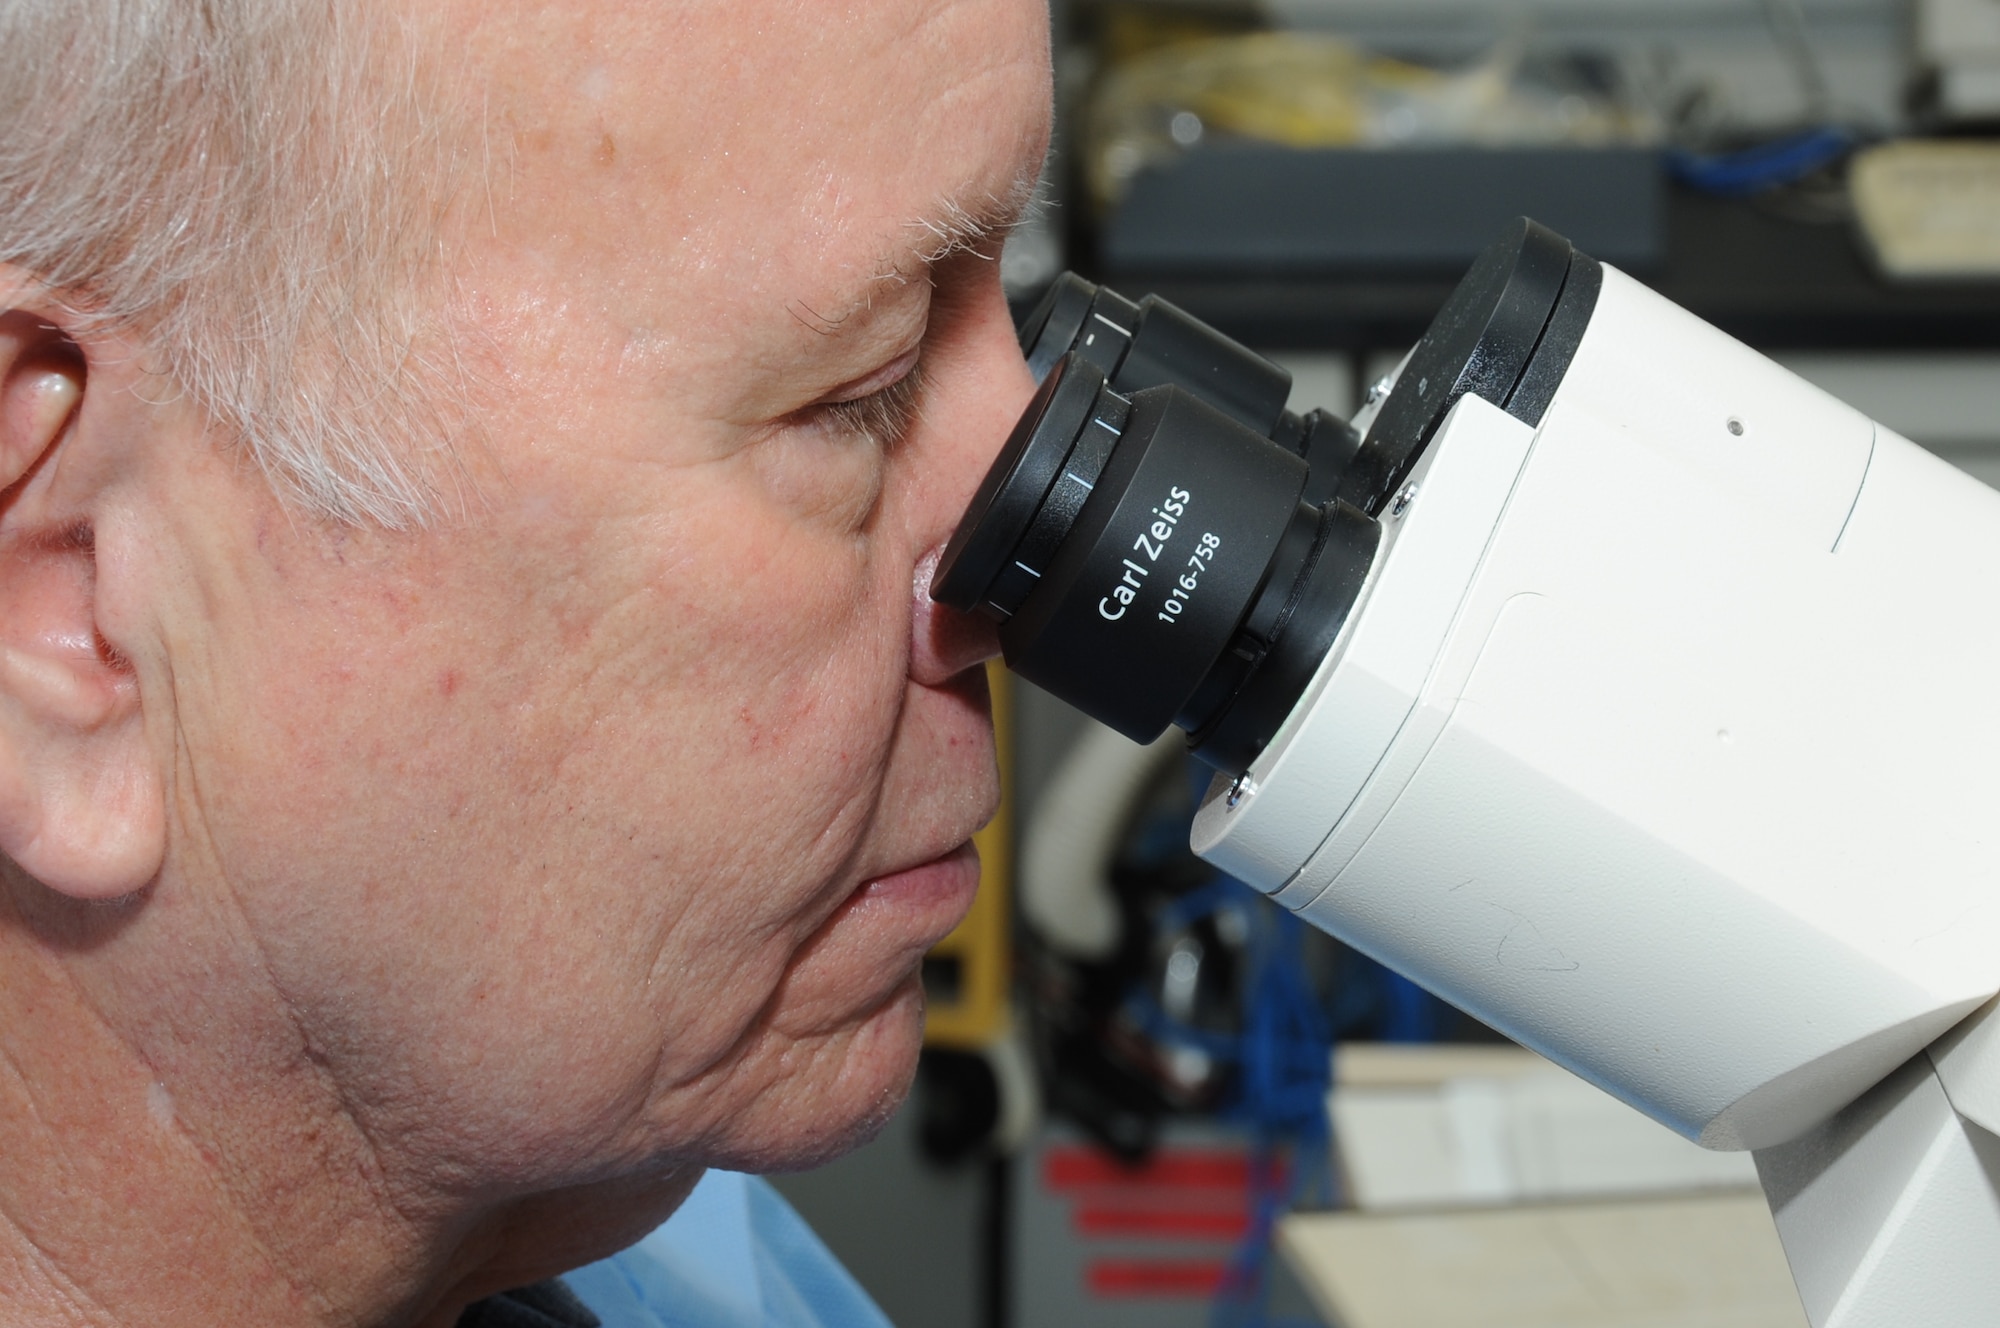 Chris Williams, 81st Medical Operations Squadron cytogenetics technologist, views metaphase under a microscope and logs his findings at the 81st Medical Group’s genetics center at Keesler Air Force Base, Miss., Feb. 17, 2012.  (U.S. Air Force photo by Kemberly Groue)